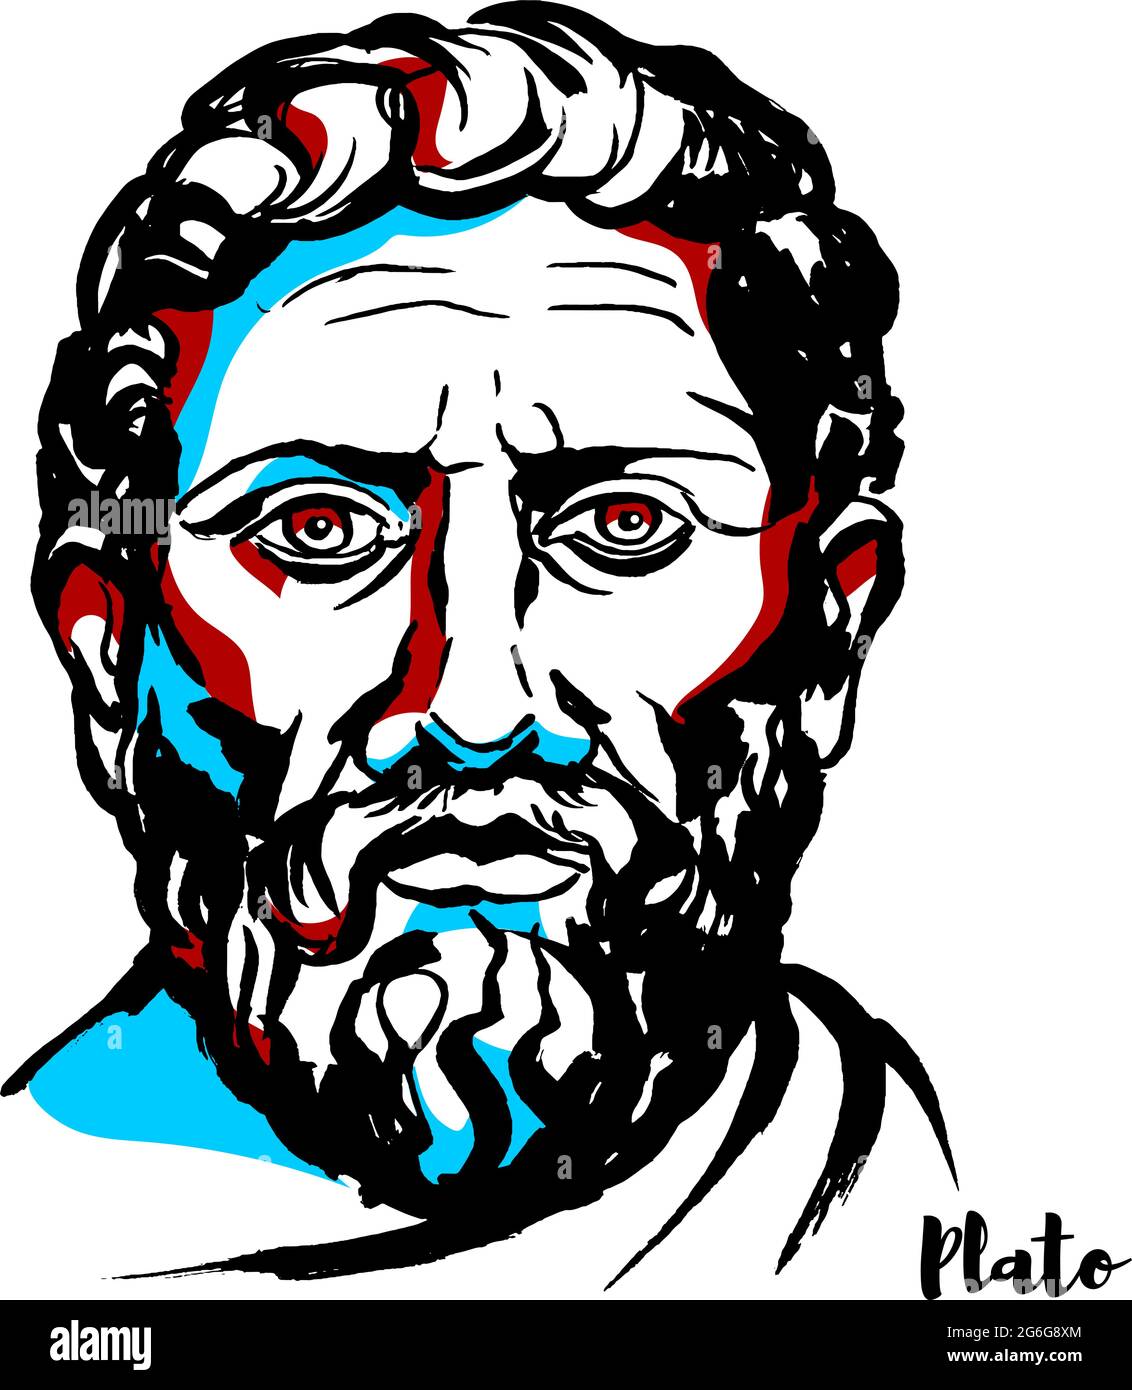 Plato engraved vector portrait with ink contours. Philosopher in Classical Greece and the founder of the Academy in Athens, the first institution of h Stock Vector